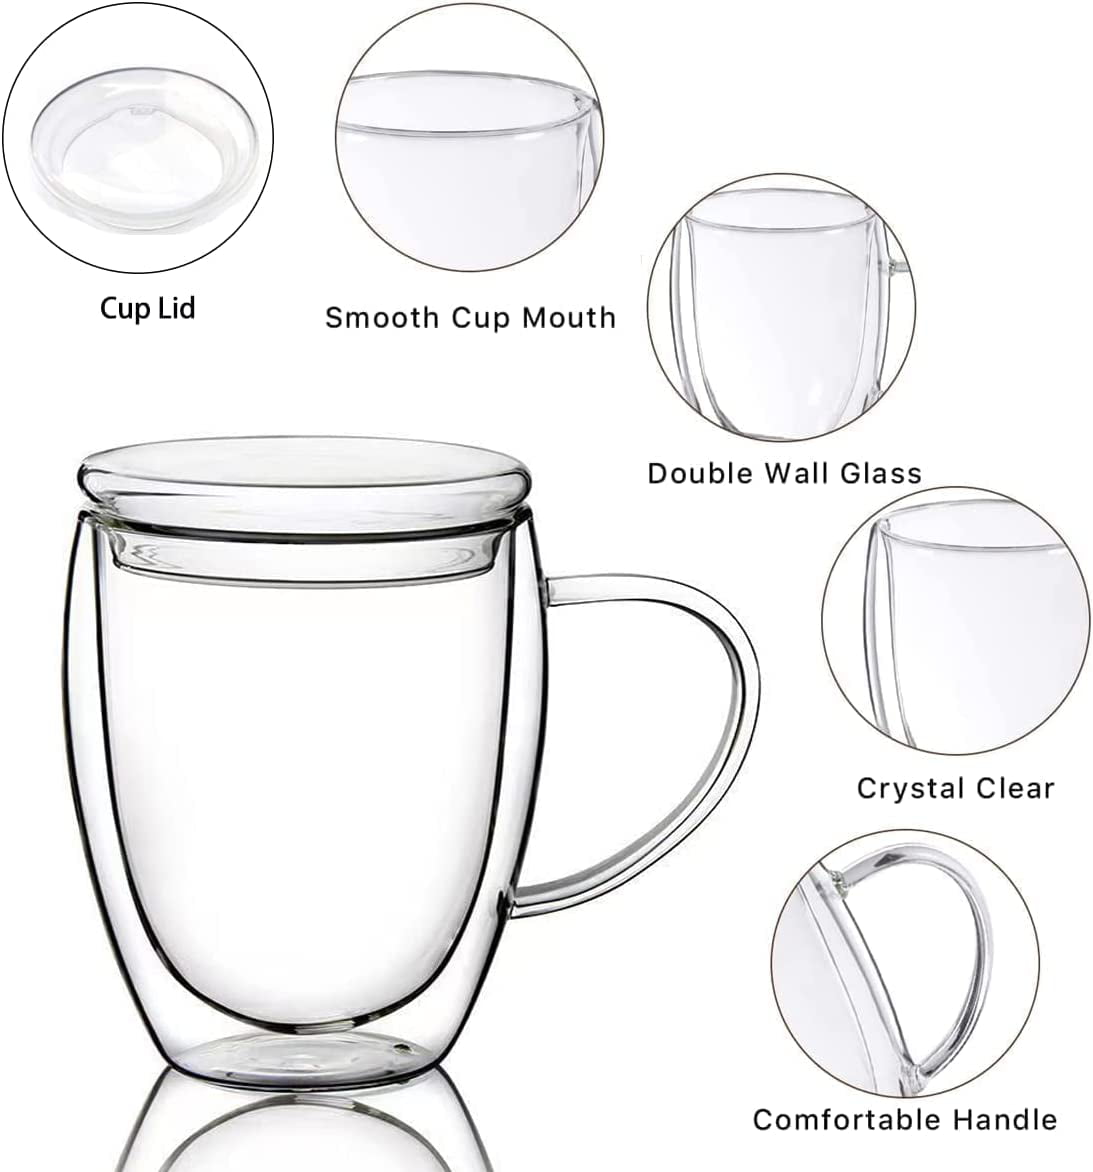  QAPPDA Glass Mugs, Clear Coffee Mugs With Handle 15 oz,Tea Mugs  450ml,Beer Glasses With Handle,Glass Cup Drinkware For Beverage,Juice,Latte  Cups Cappuccino Mugs Beer Mug Water Cups Sets of 8 KTZB107… 